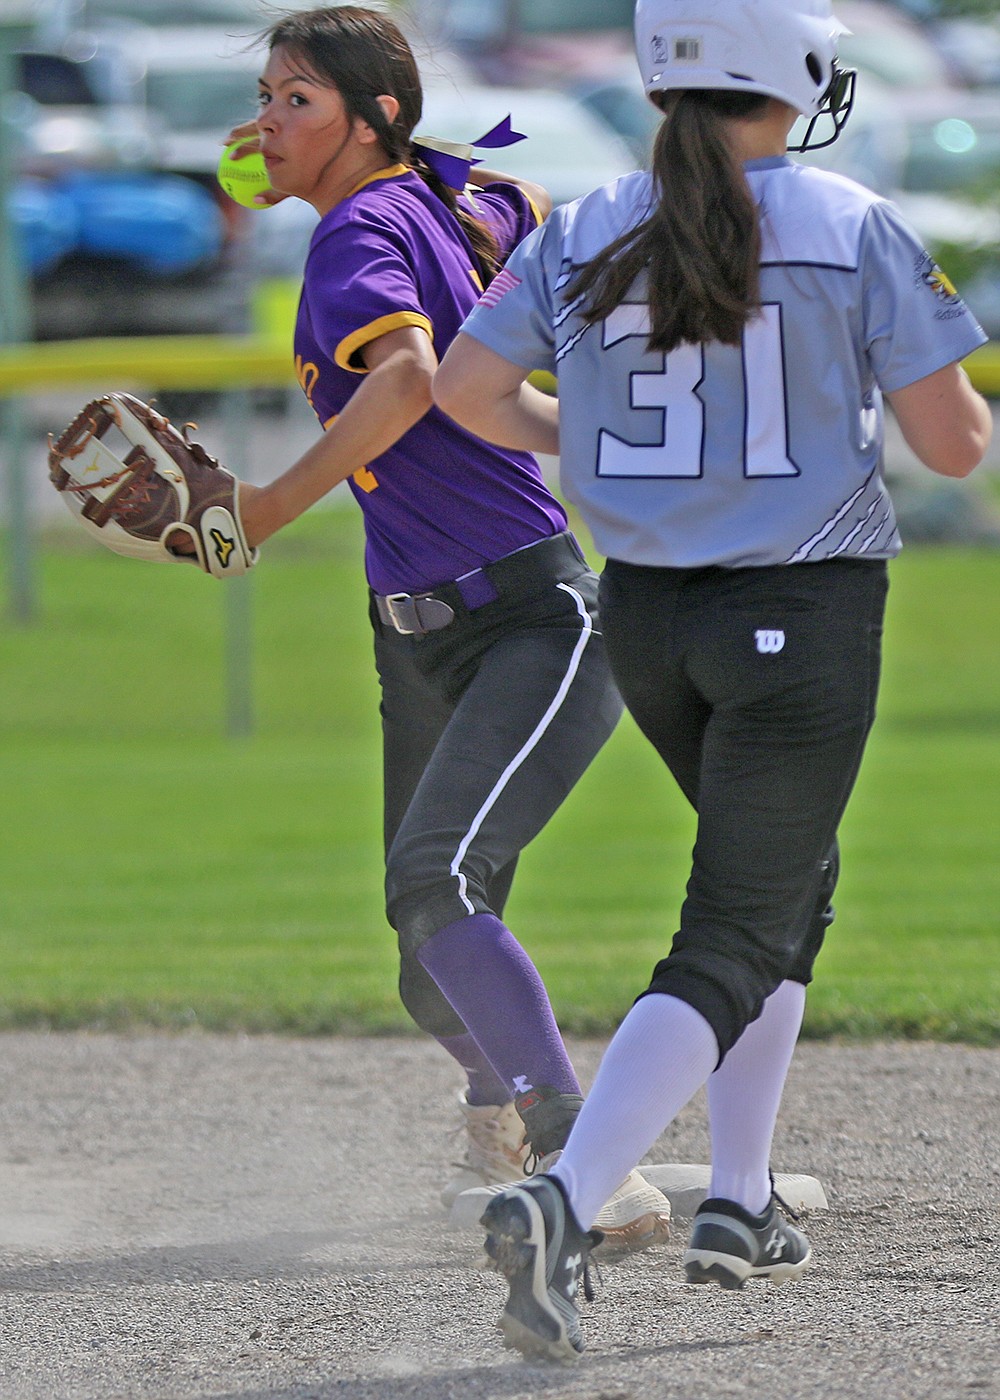 16U Polson Lady Pirate Josie Caye makes a double play during a game at the 2020 Emeralds Smash softball tournament in Kalispell June 26-28. (Bob Gunderson photo)